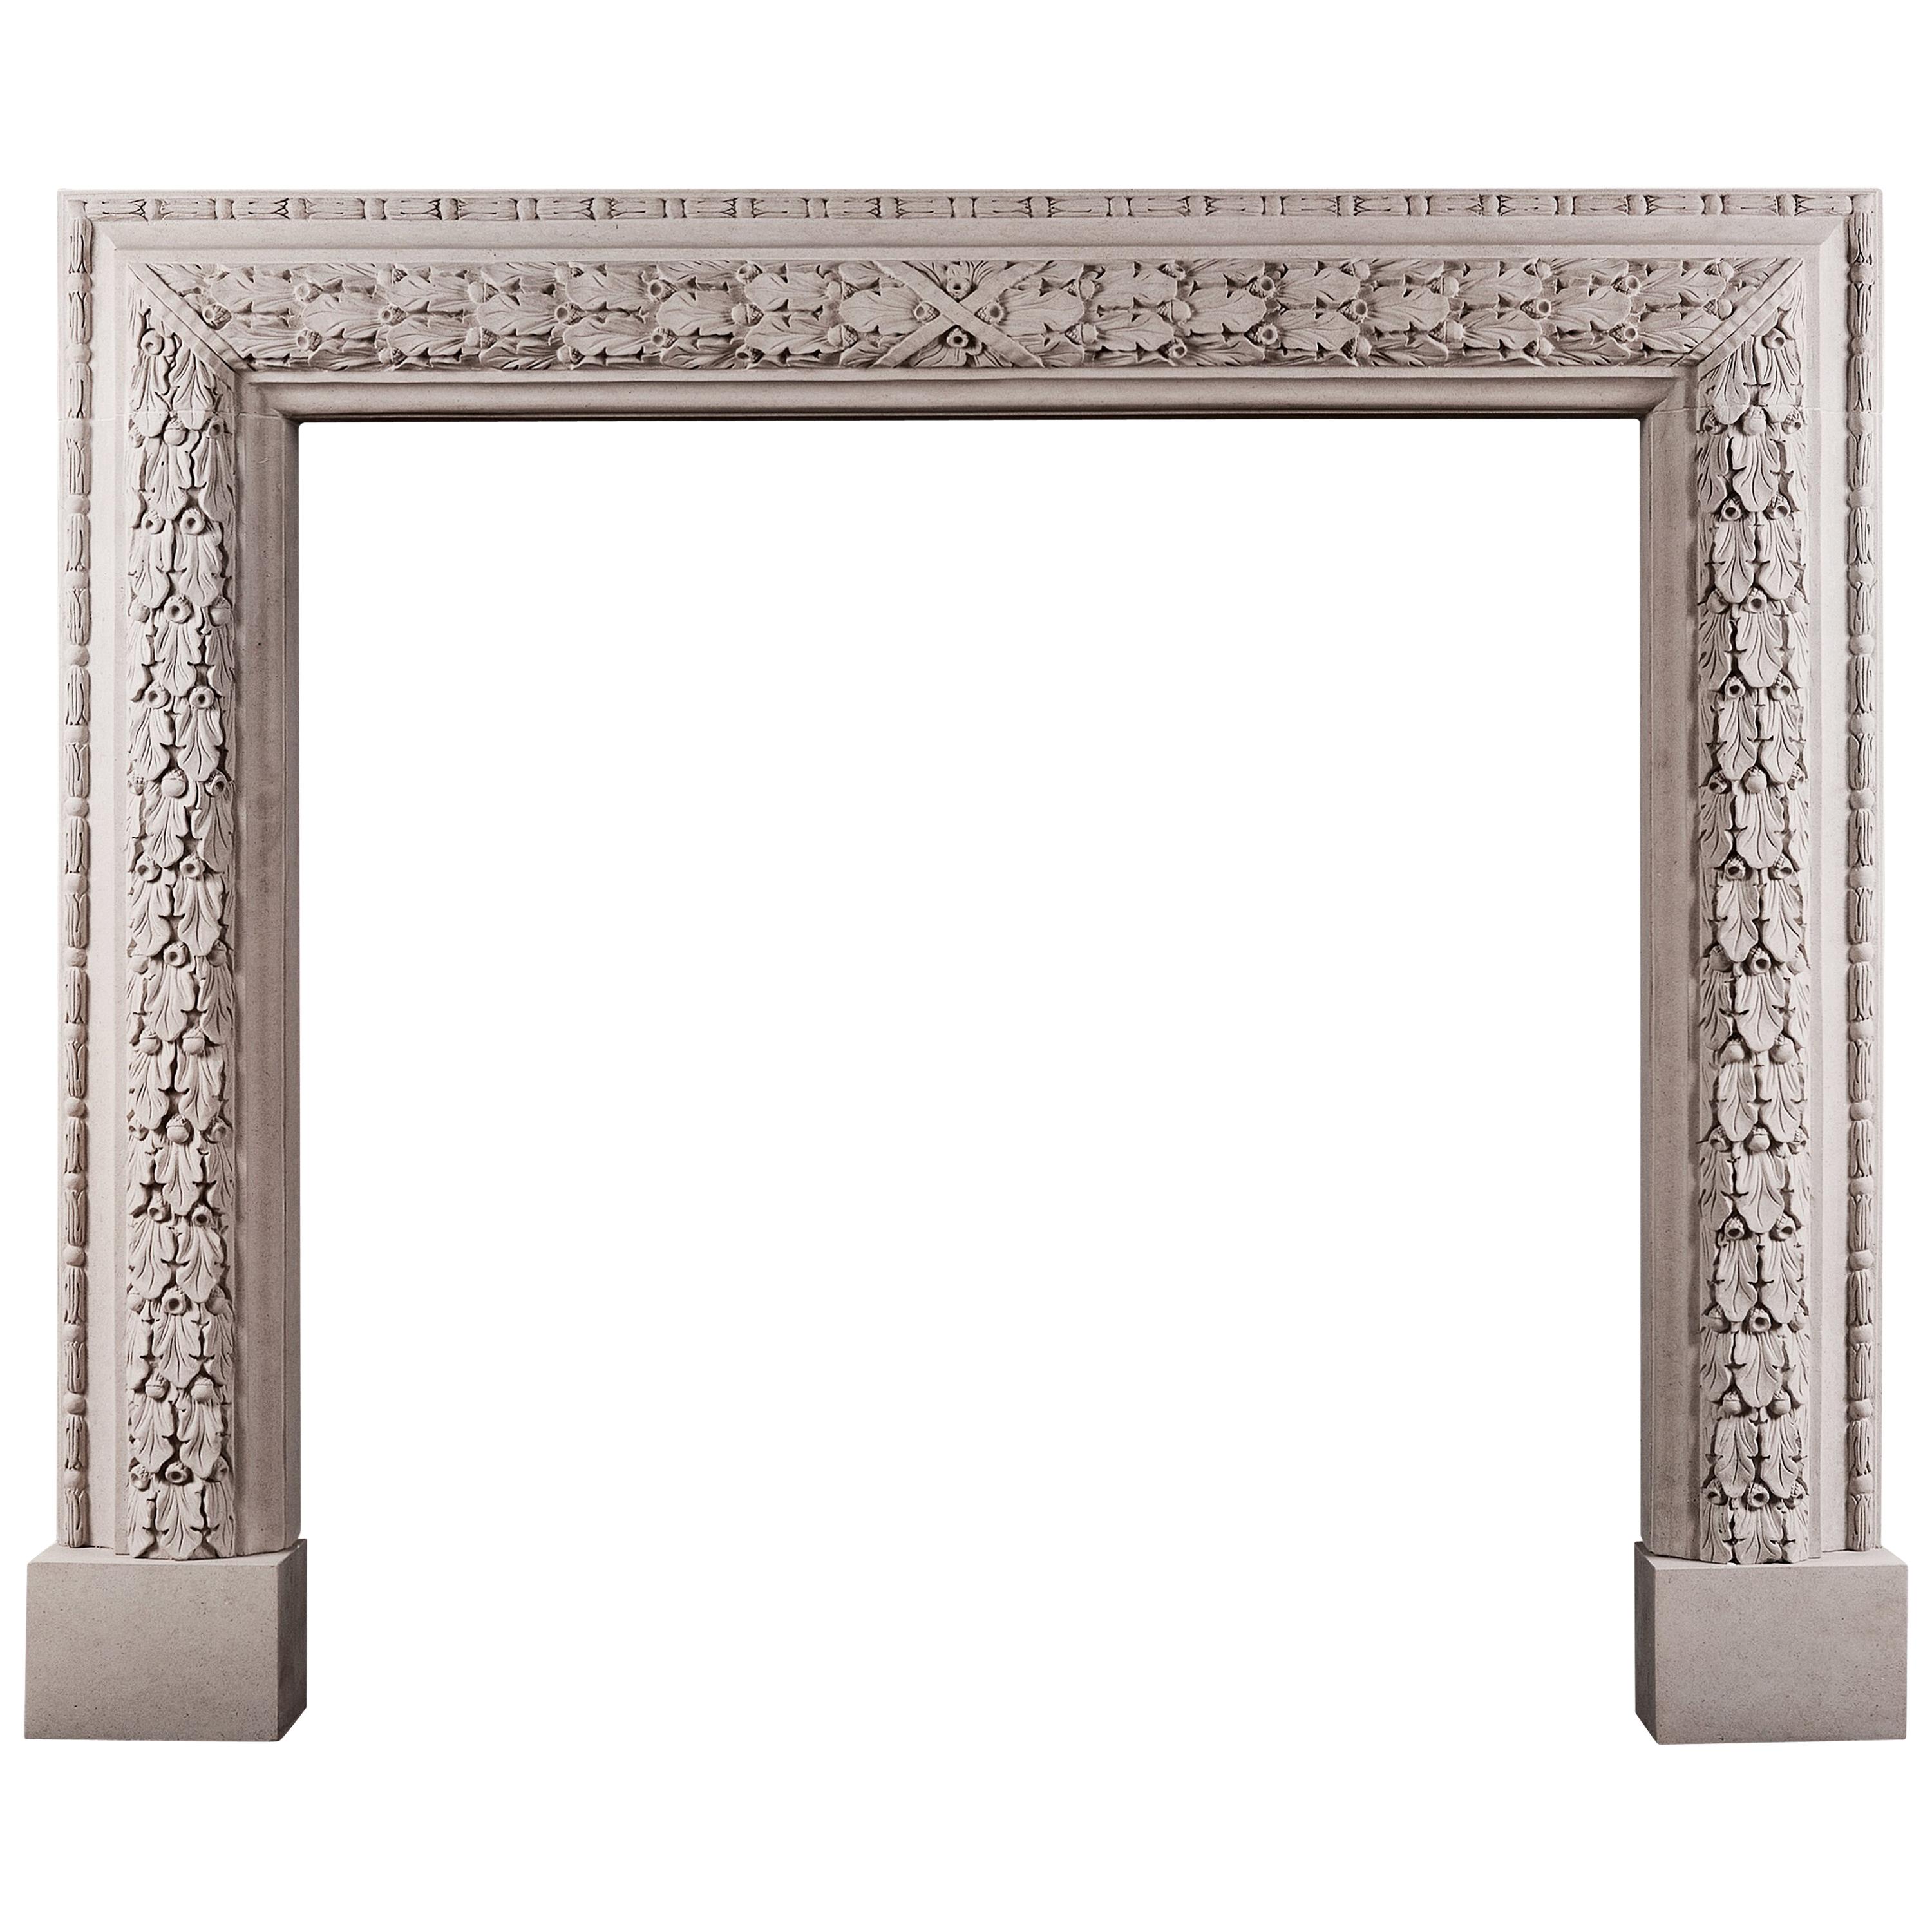 Elegant Carved Bolection Fireplace in Portland Stone